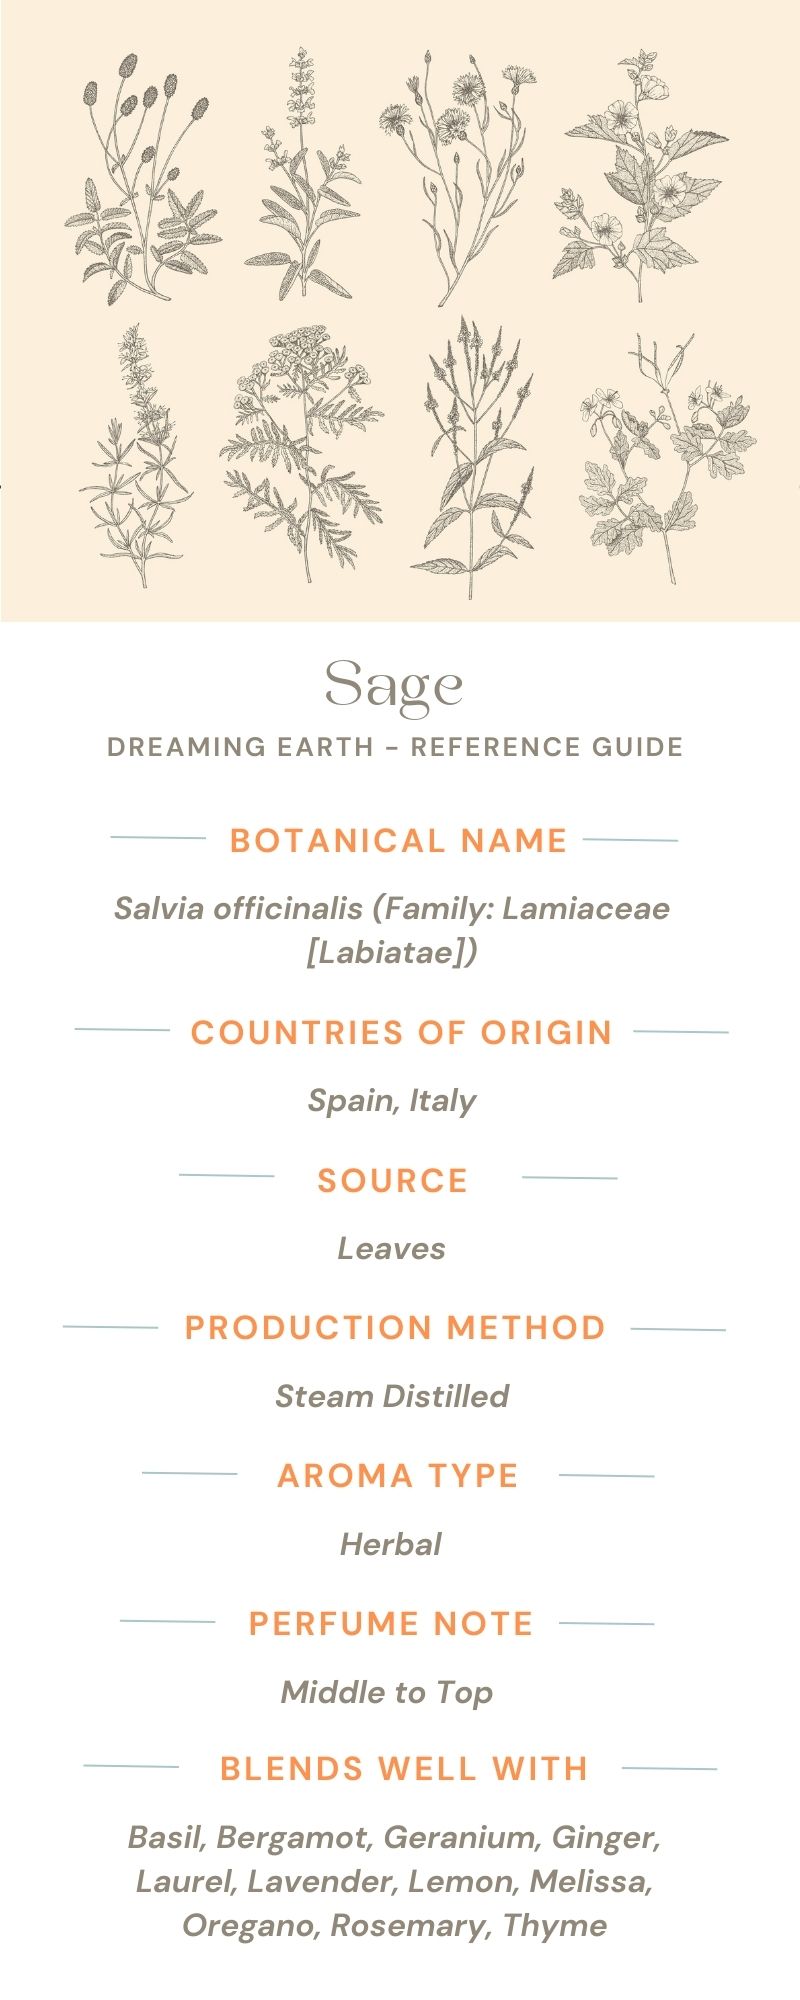 Load image into Gallery viewer, Sage Essential Oil (Spanish) - Dreaming Earth Inc
